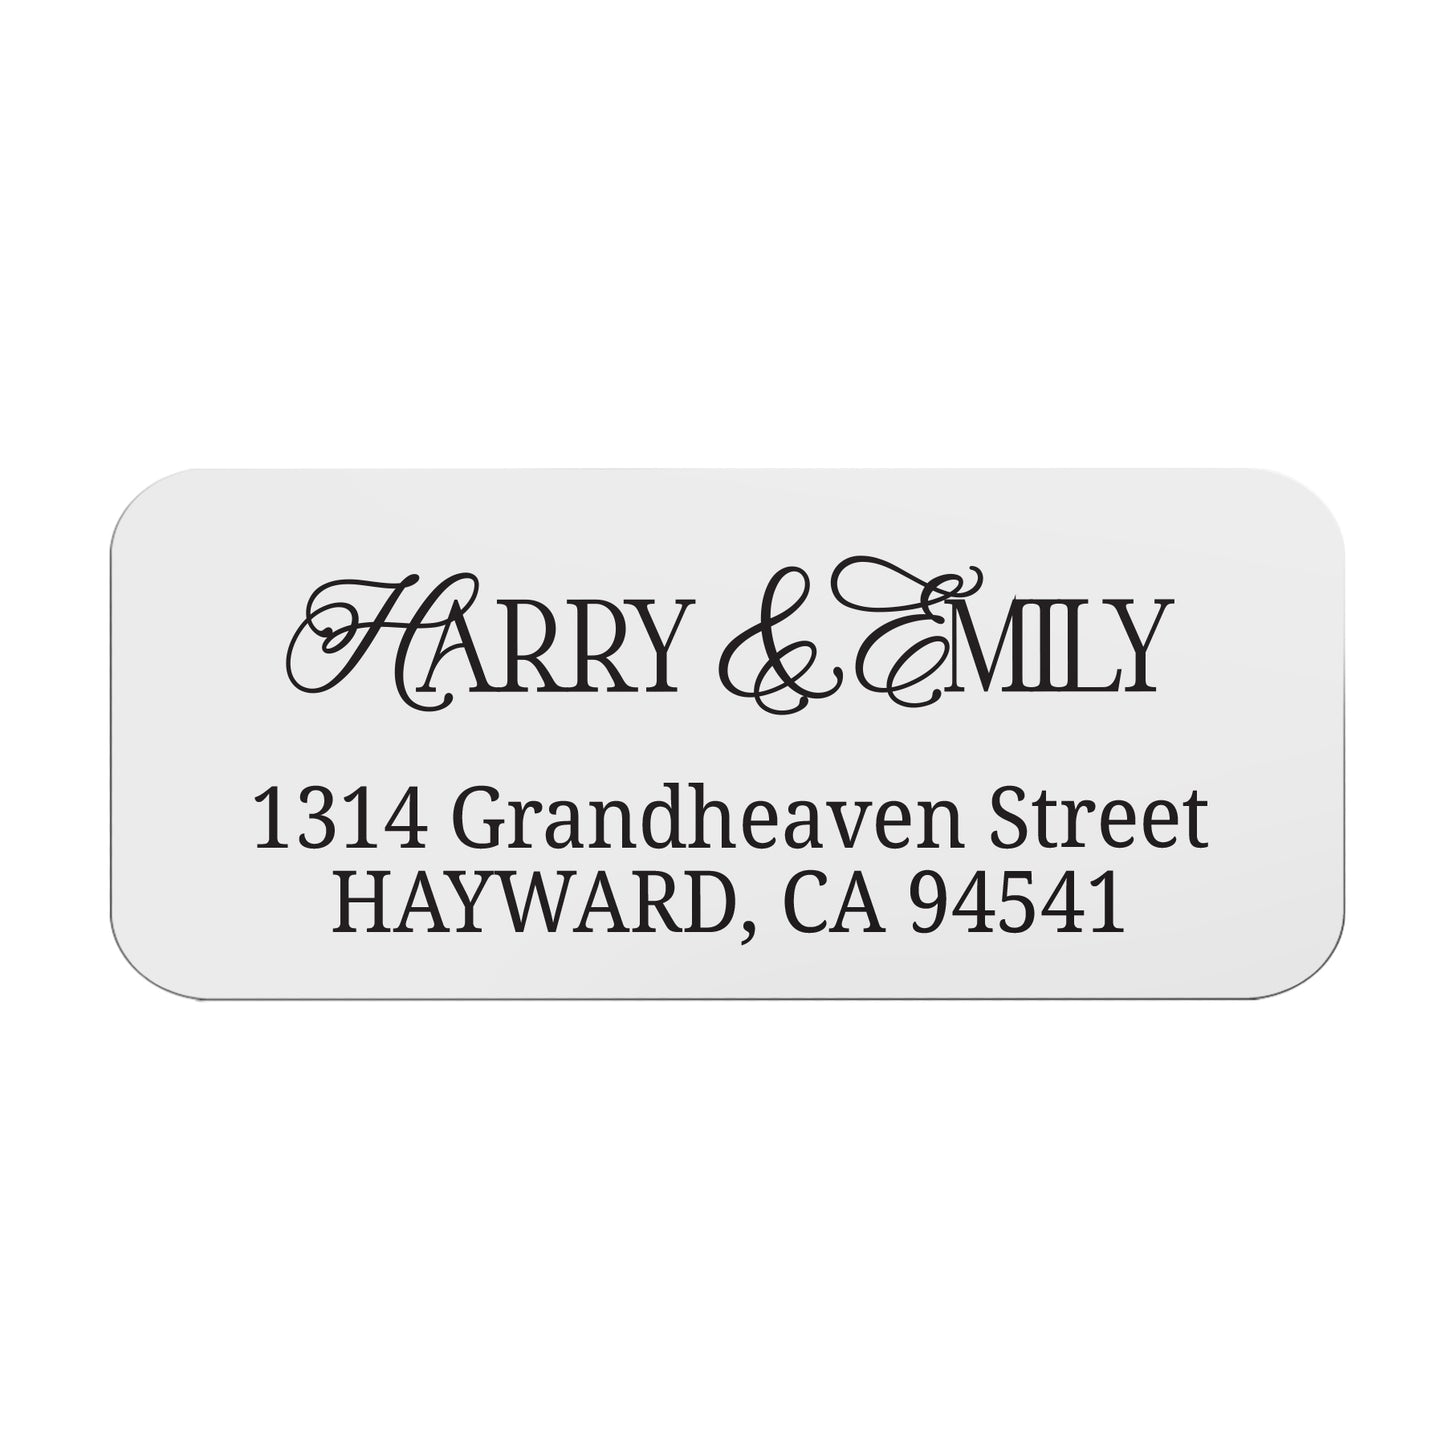 Stylish Return Address Labels for Wedding Stationery - Personalized Design Options - Classic Black Ink - Easy-to-Apply Clear Self-Adhesive Pape